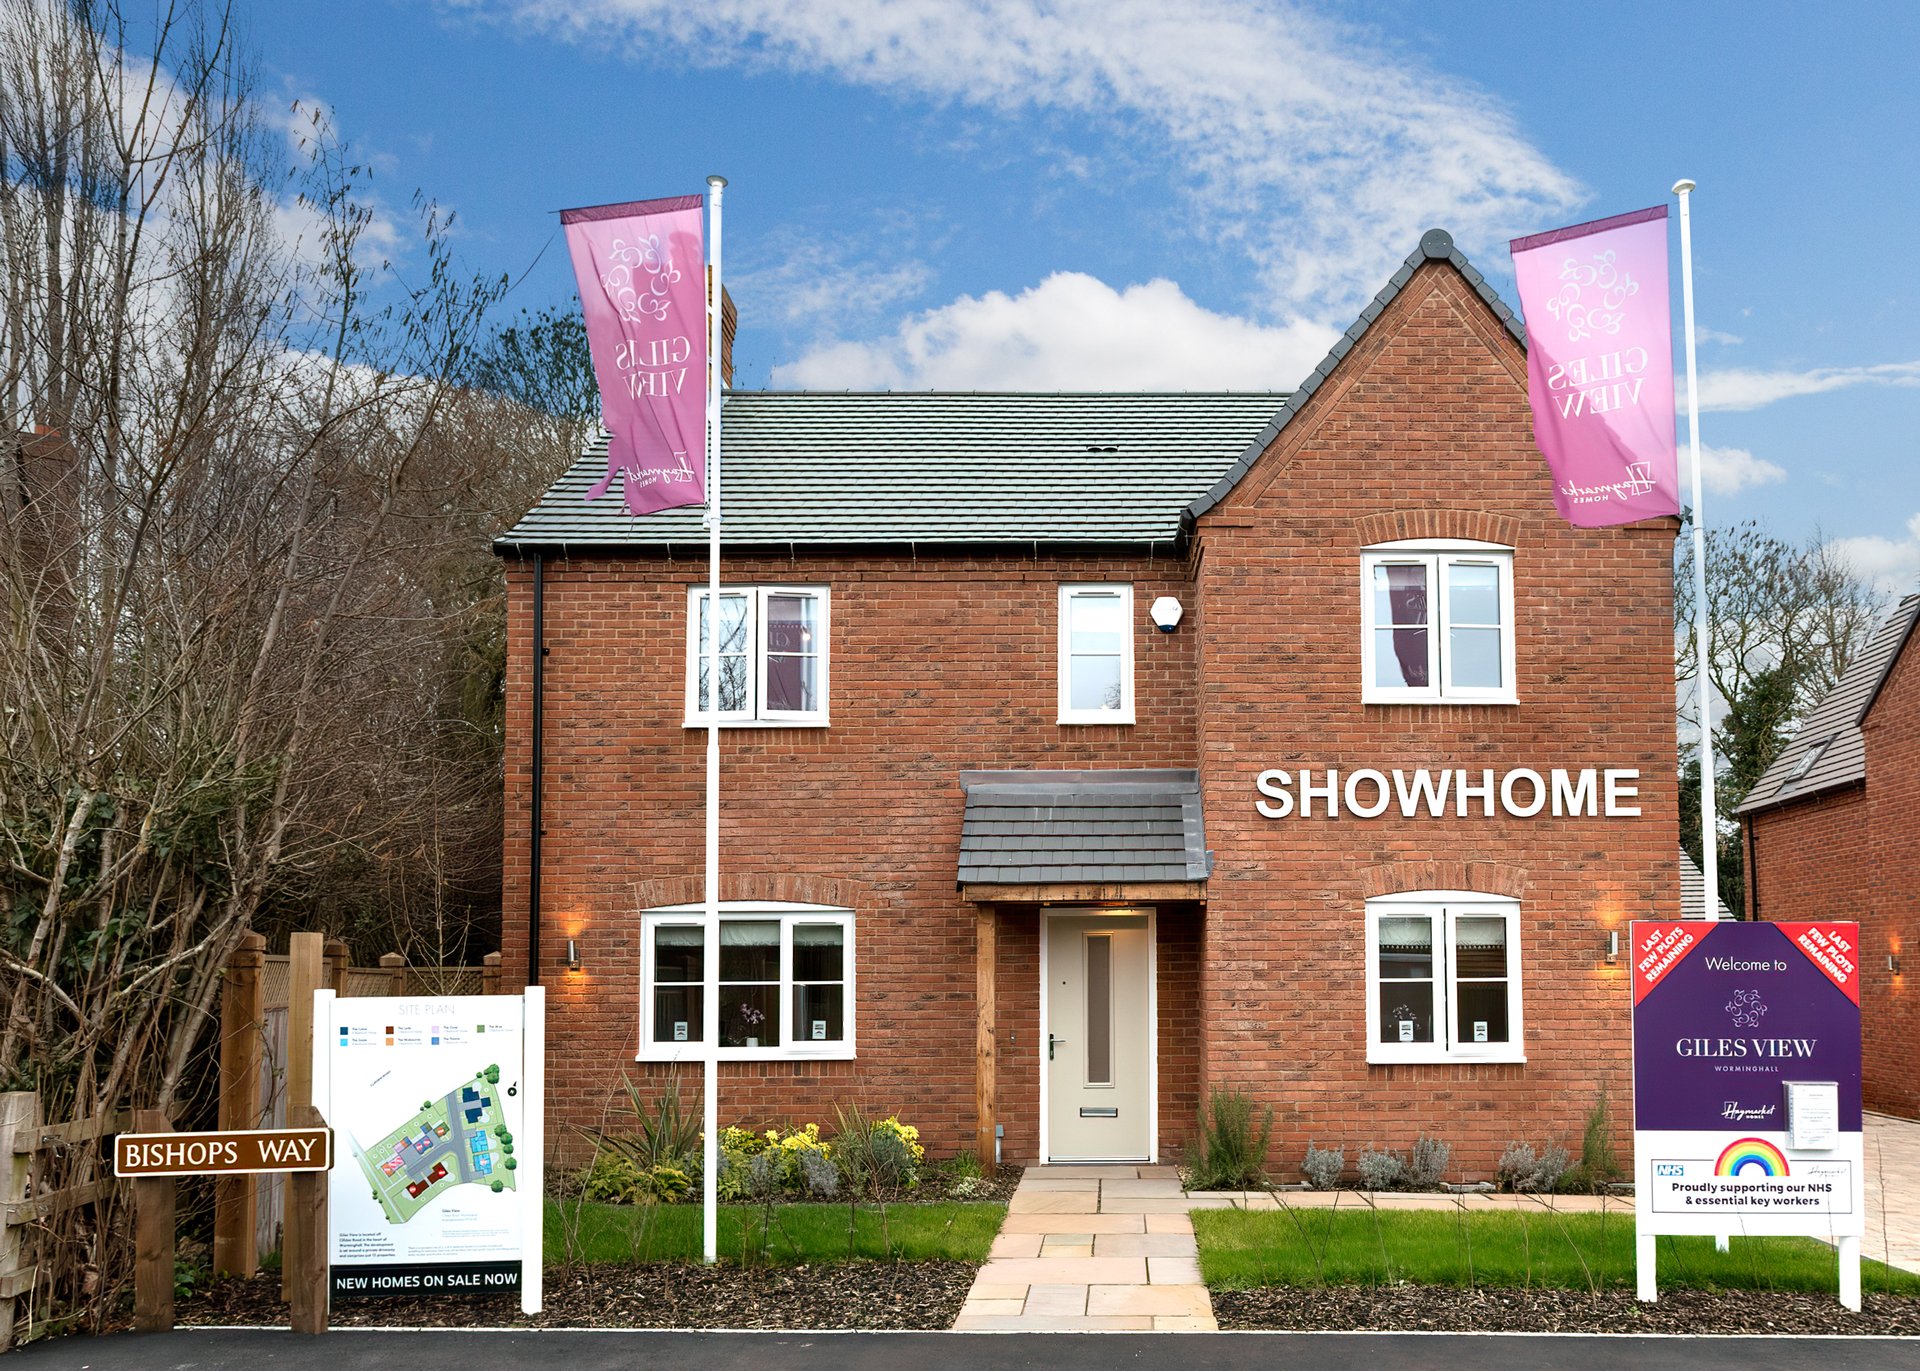 Buying with Showhome